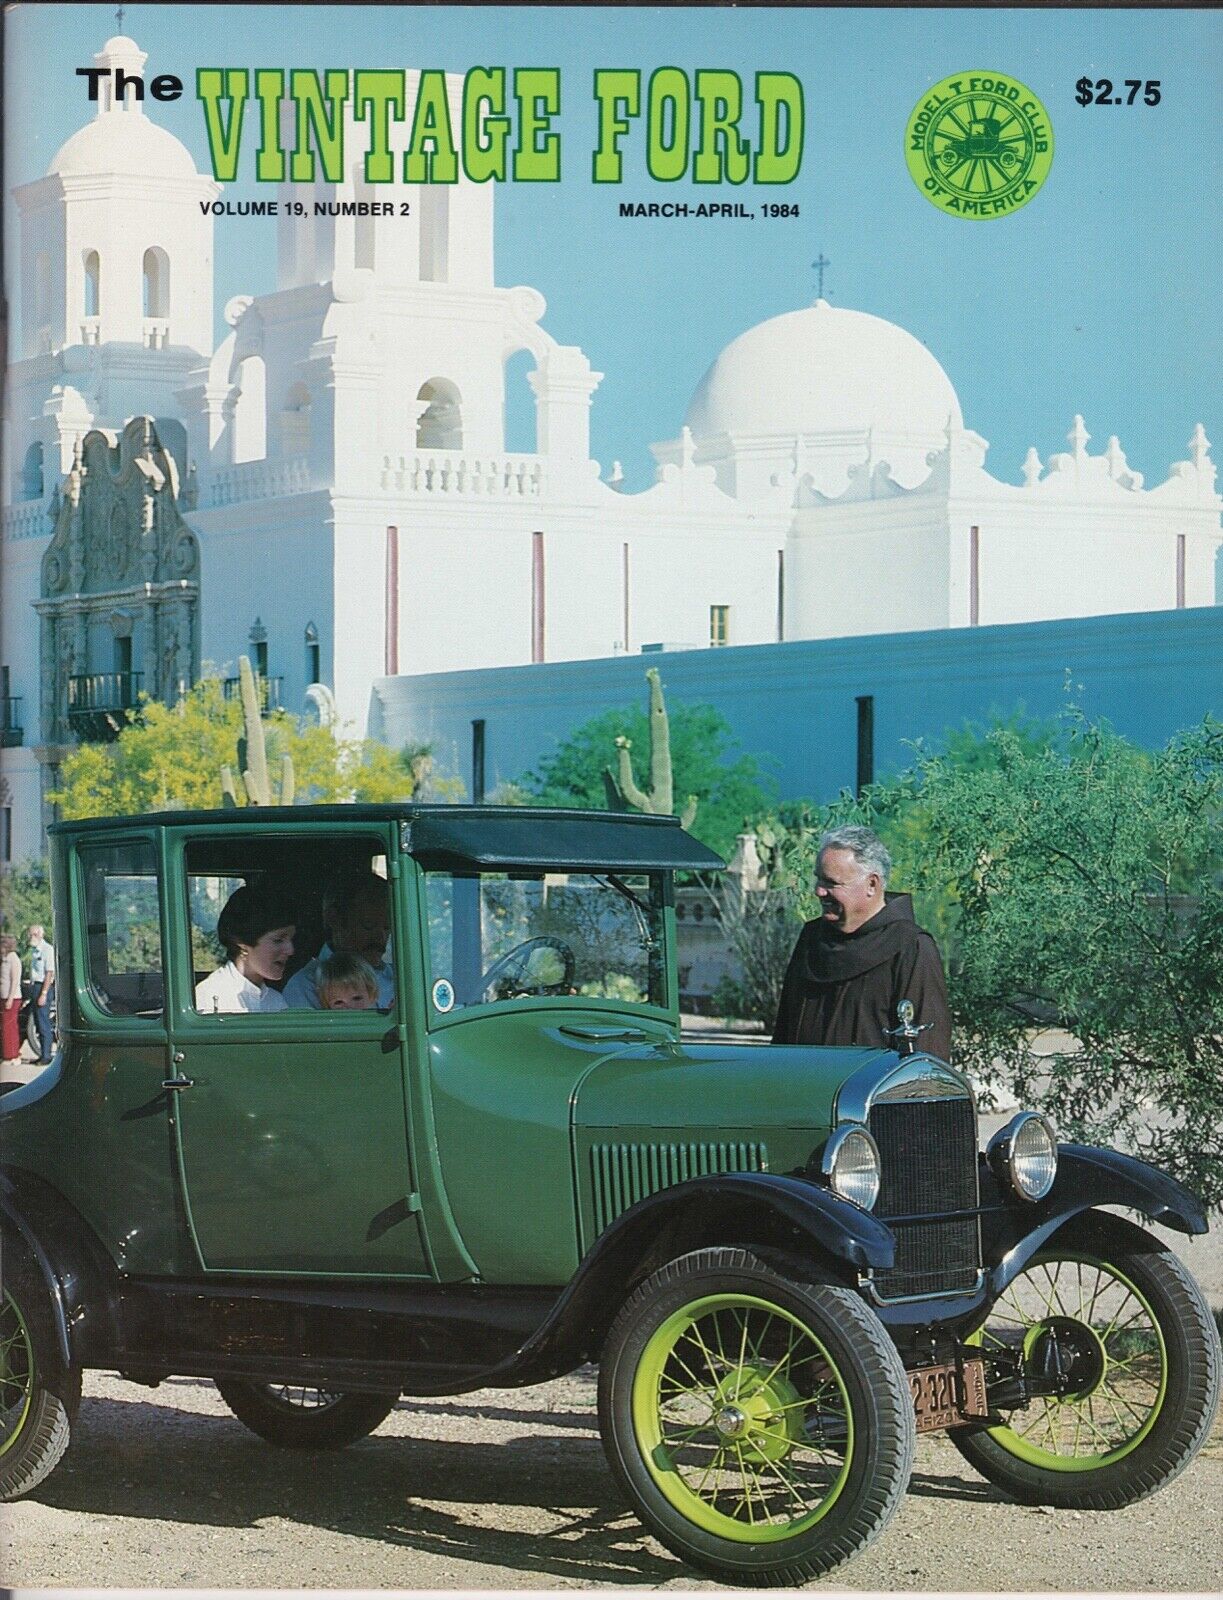 1927 COUPE - VINTAGE FORD MAGAZINE 1984 - THE MODEL CLUB AMERICA